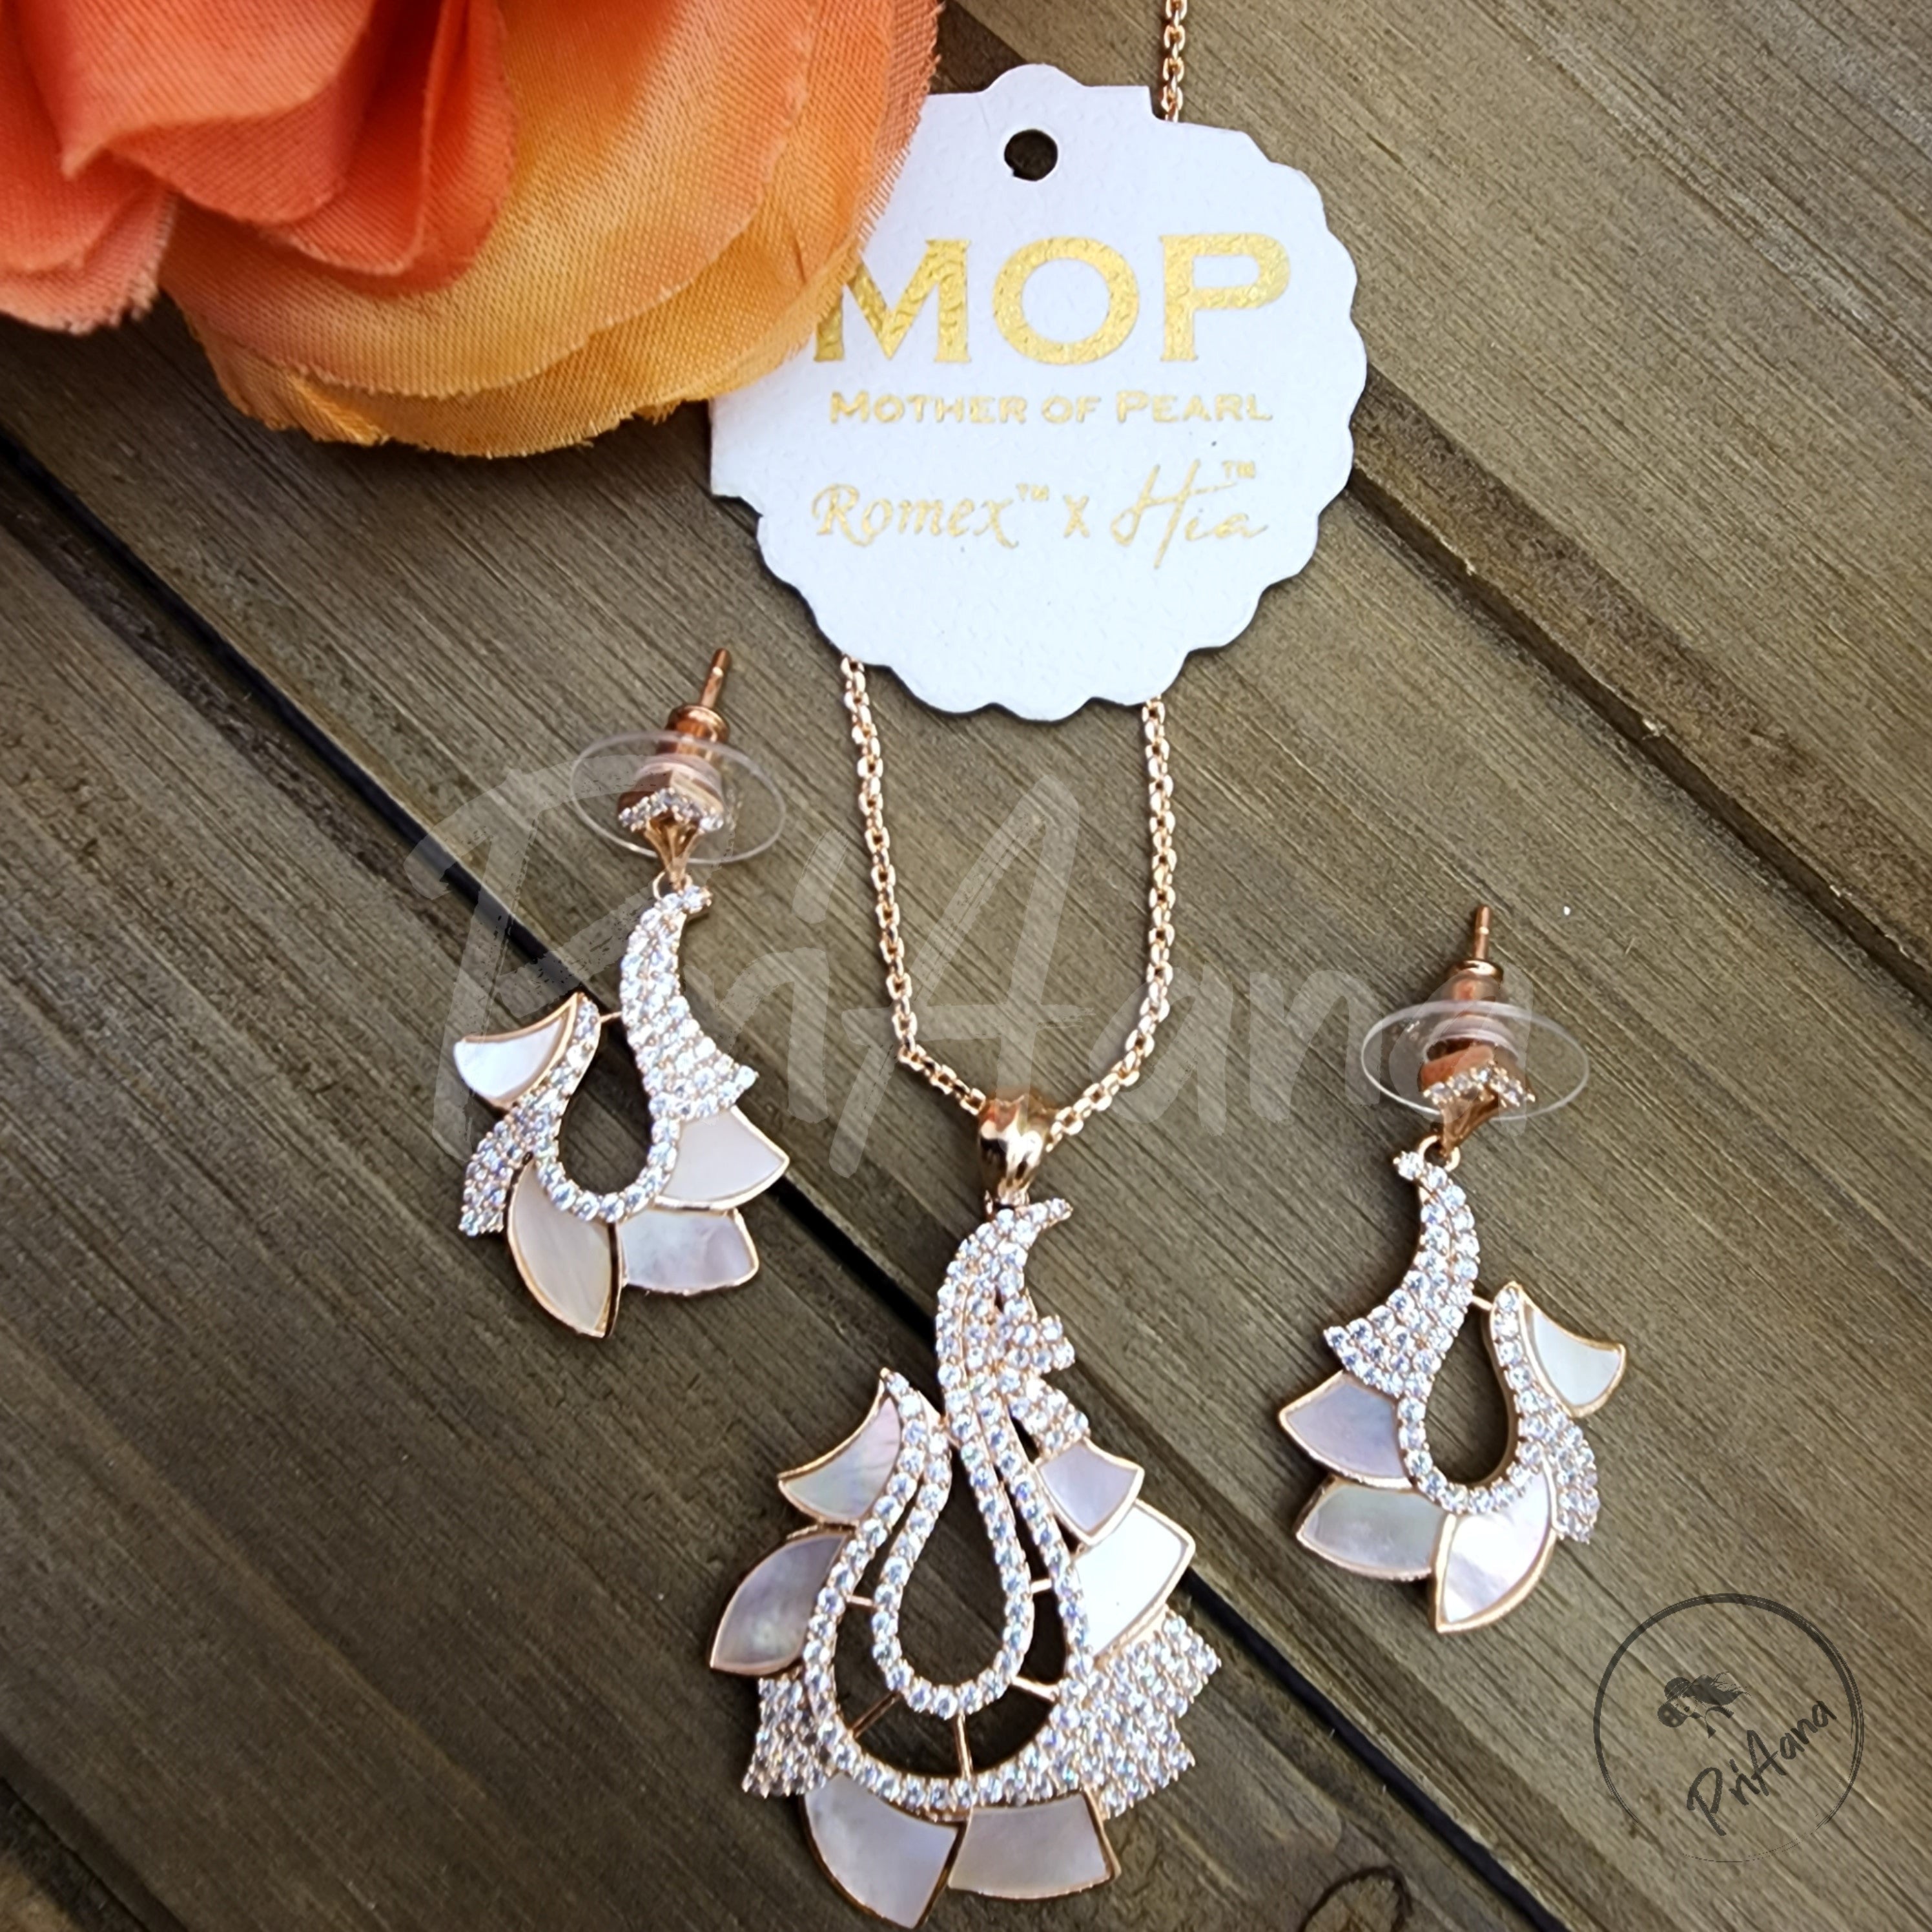 Gorgeous Mother of Pearls Necklace Set By Asp Fashion Jewellery – 𝗔𝘀𝗽  𝗙𝗮𝘀𝗵𝗶𝗼𝗻 𝗝𝗲𝘄𝗲𝗹𝗹𝗲𝗿𝘆